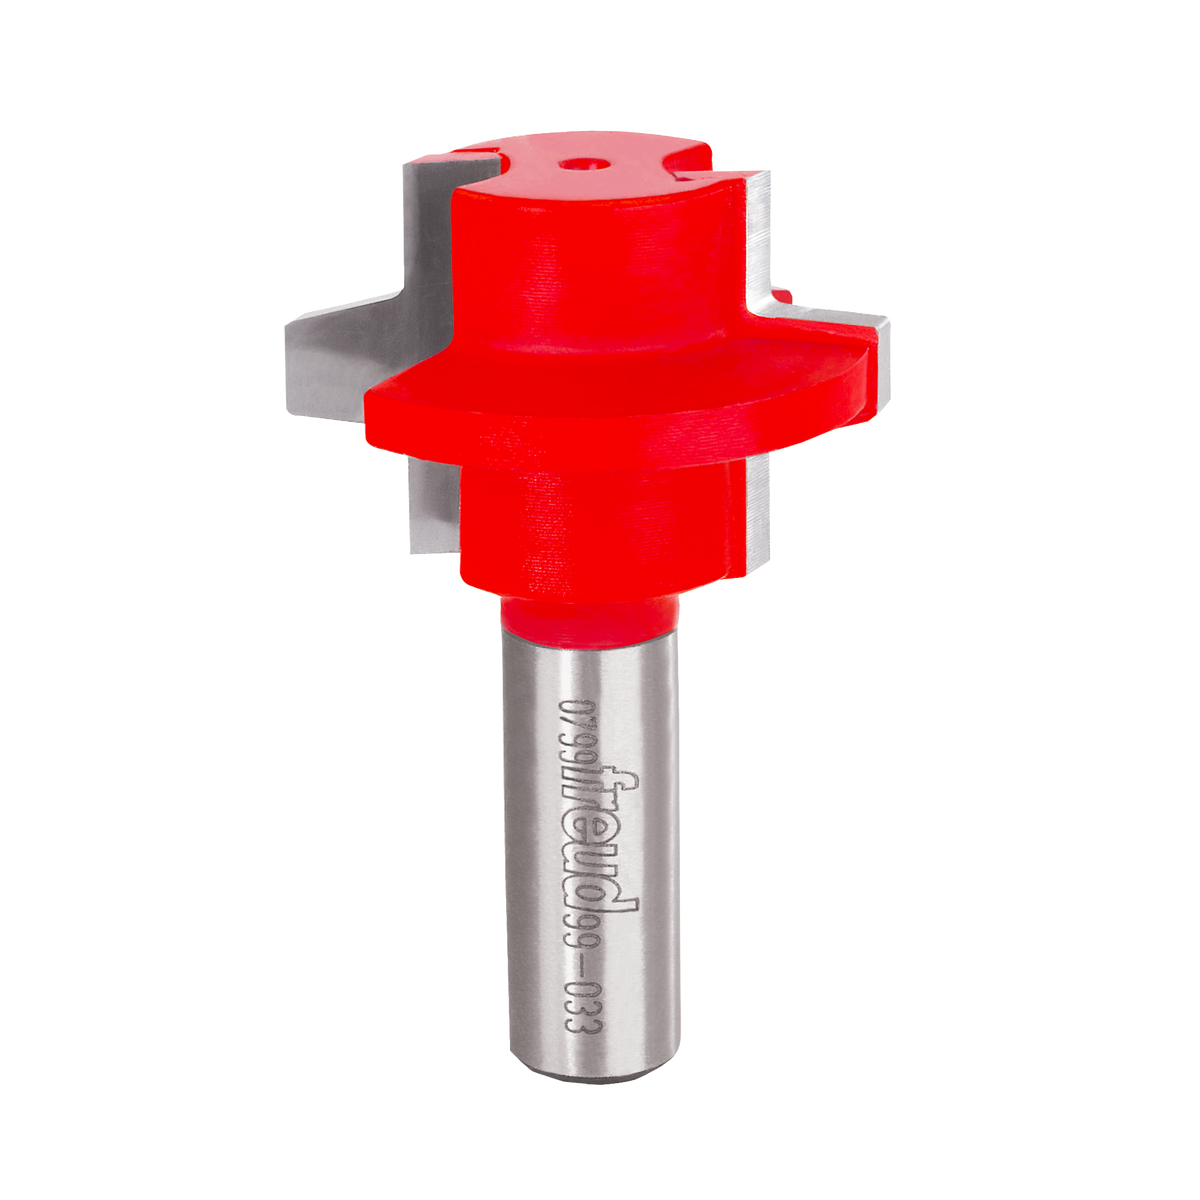 Freud Wedge Tongue & Groove Router Bits